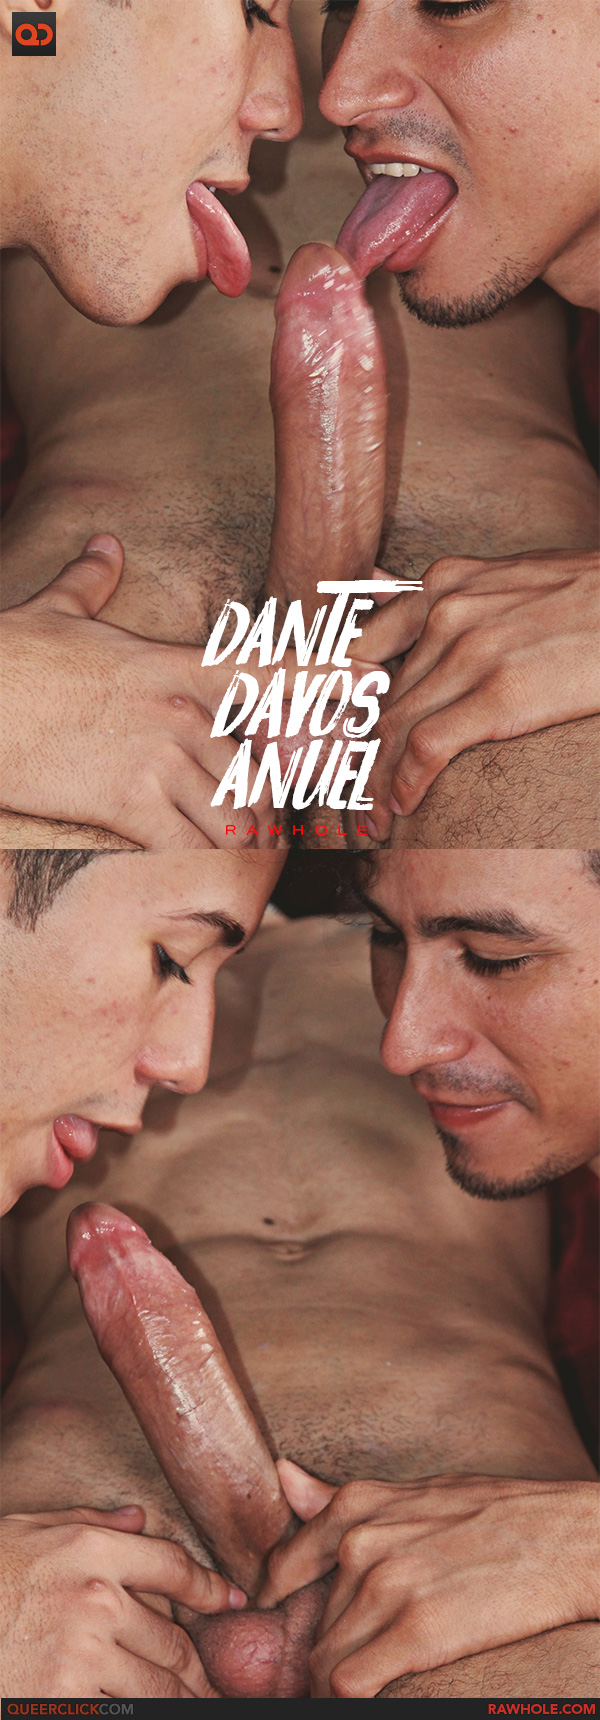 Raw Hole: Dante, Davos and Anuel